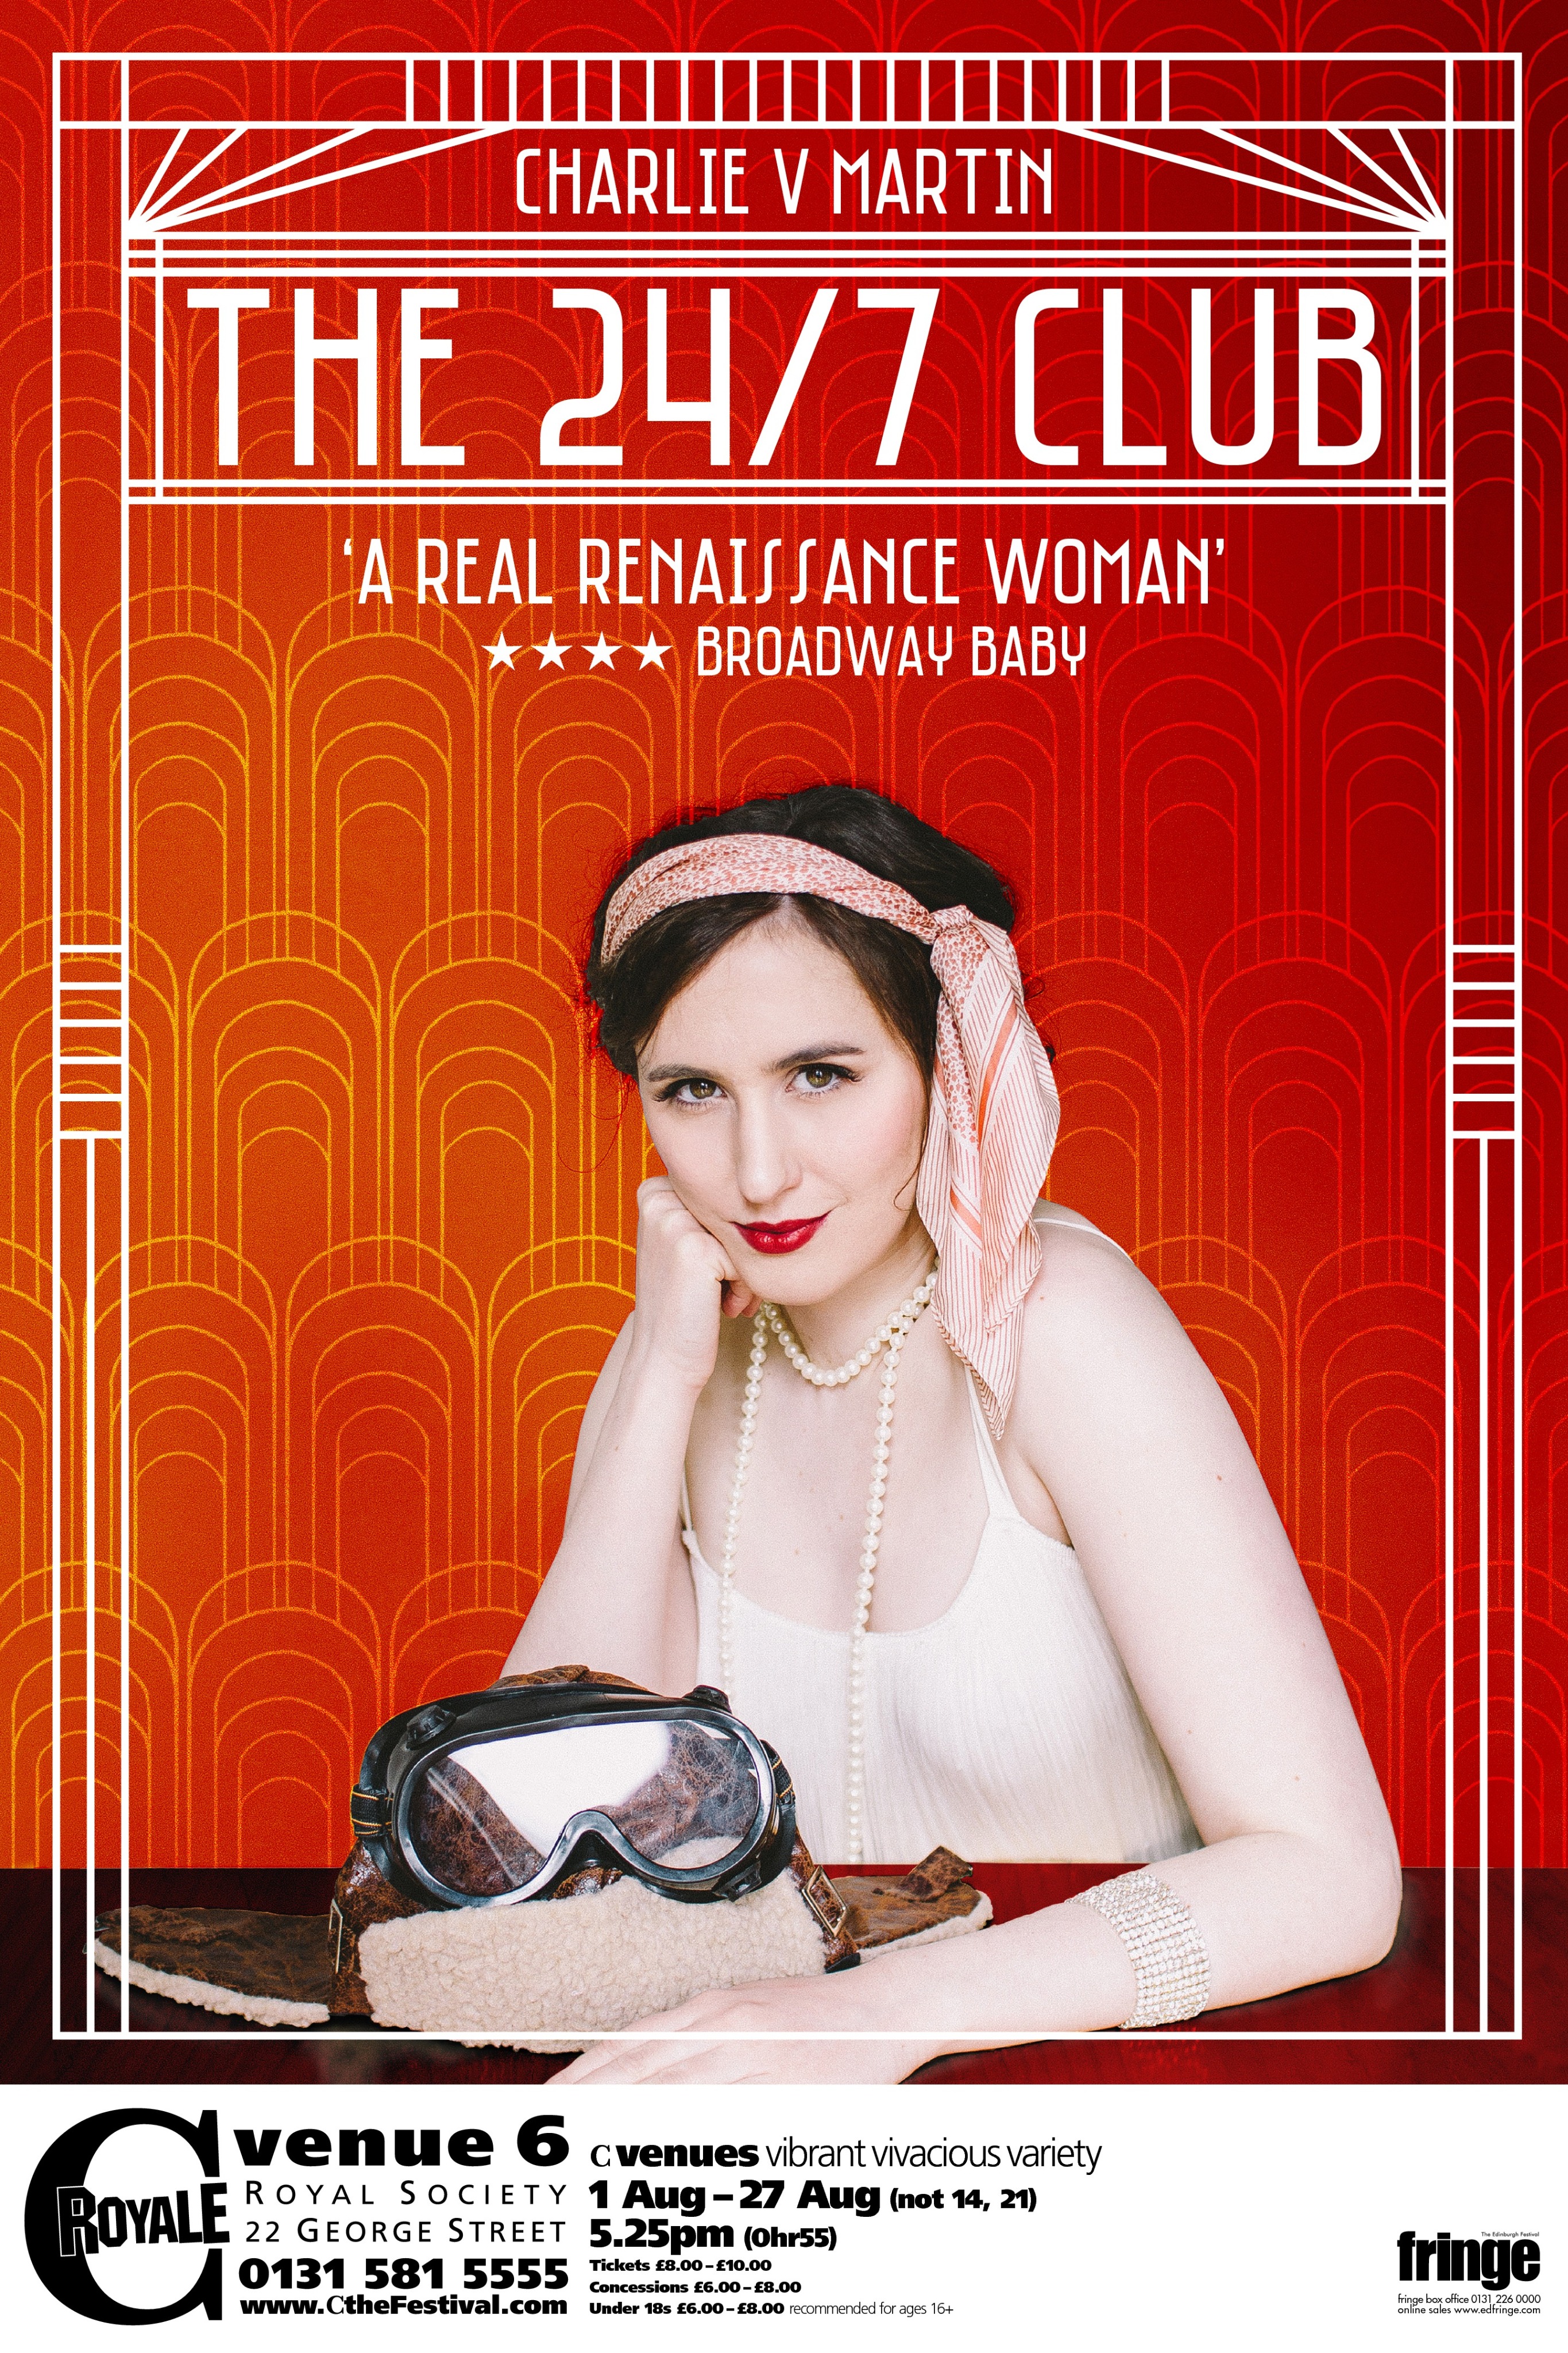 The poster for Charlie V Martin: The 24/7 Club